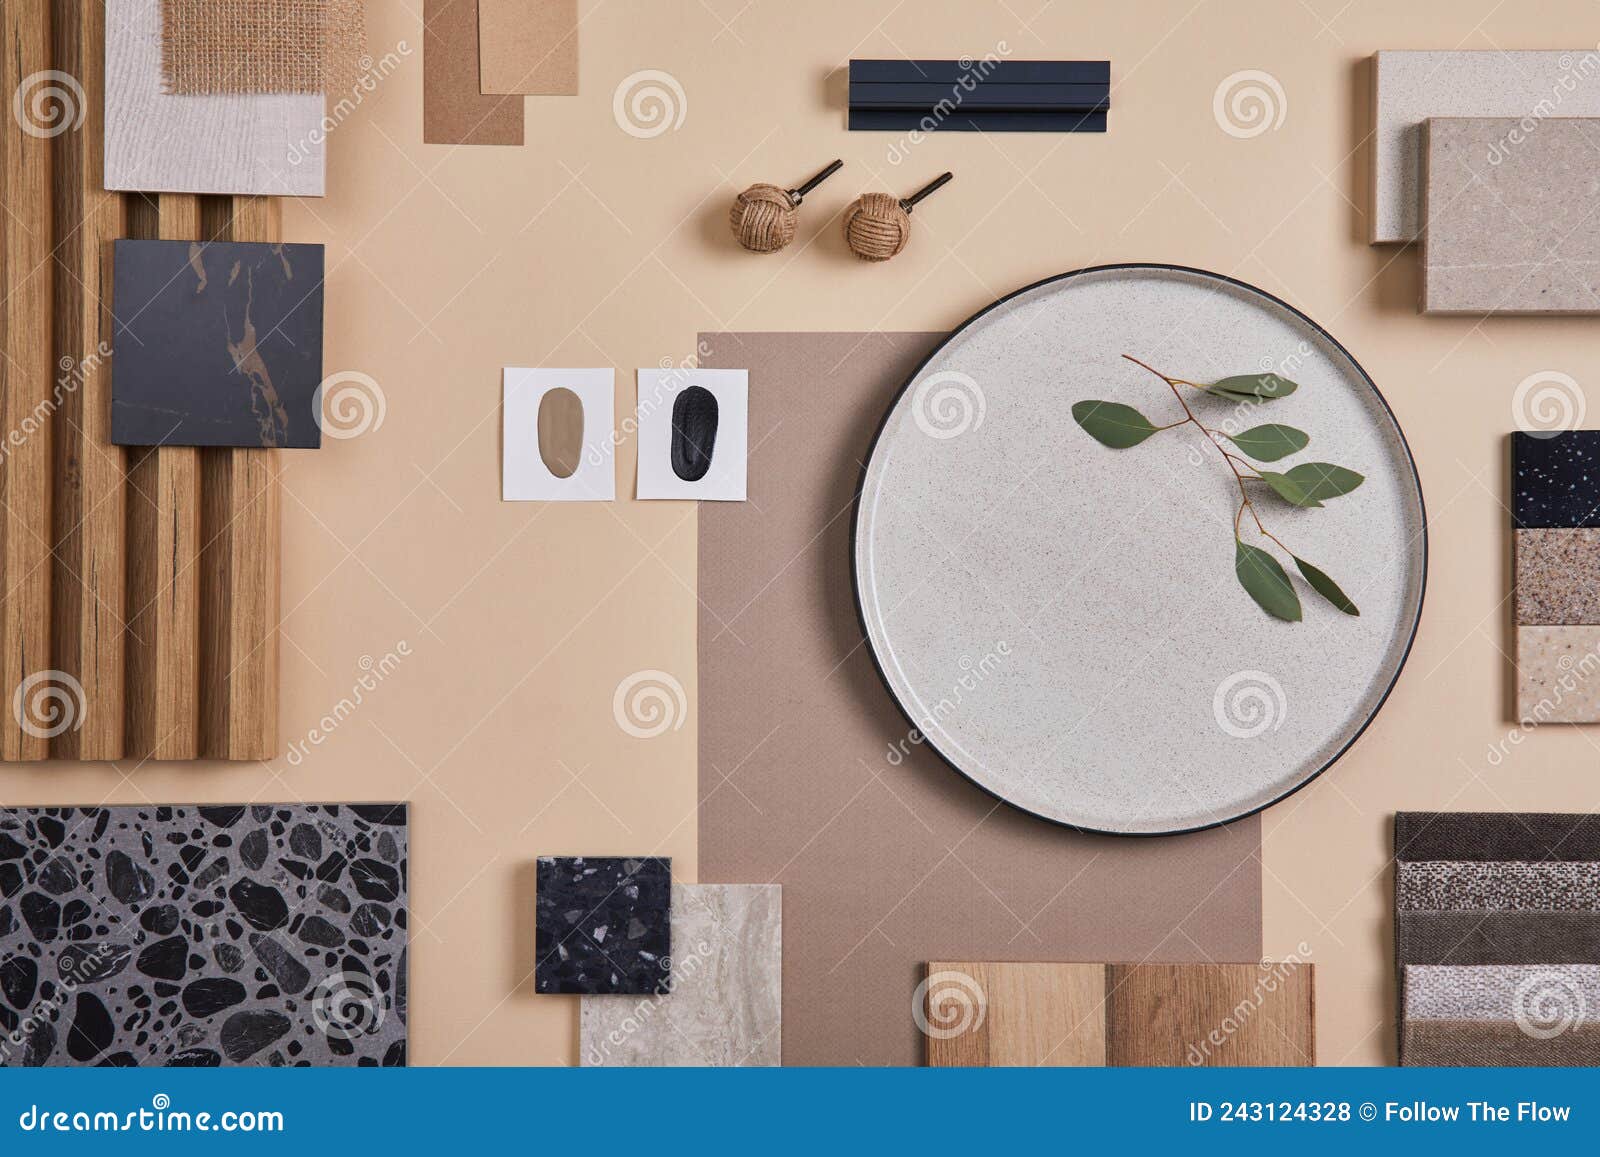 creative flat lay composition of interior er and architect moodboard. textile and paint samples, lamella panels.